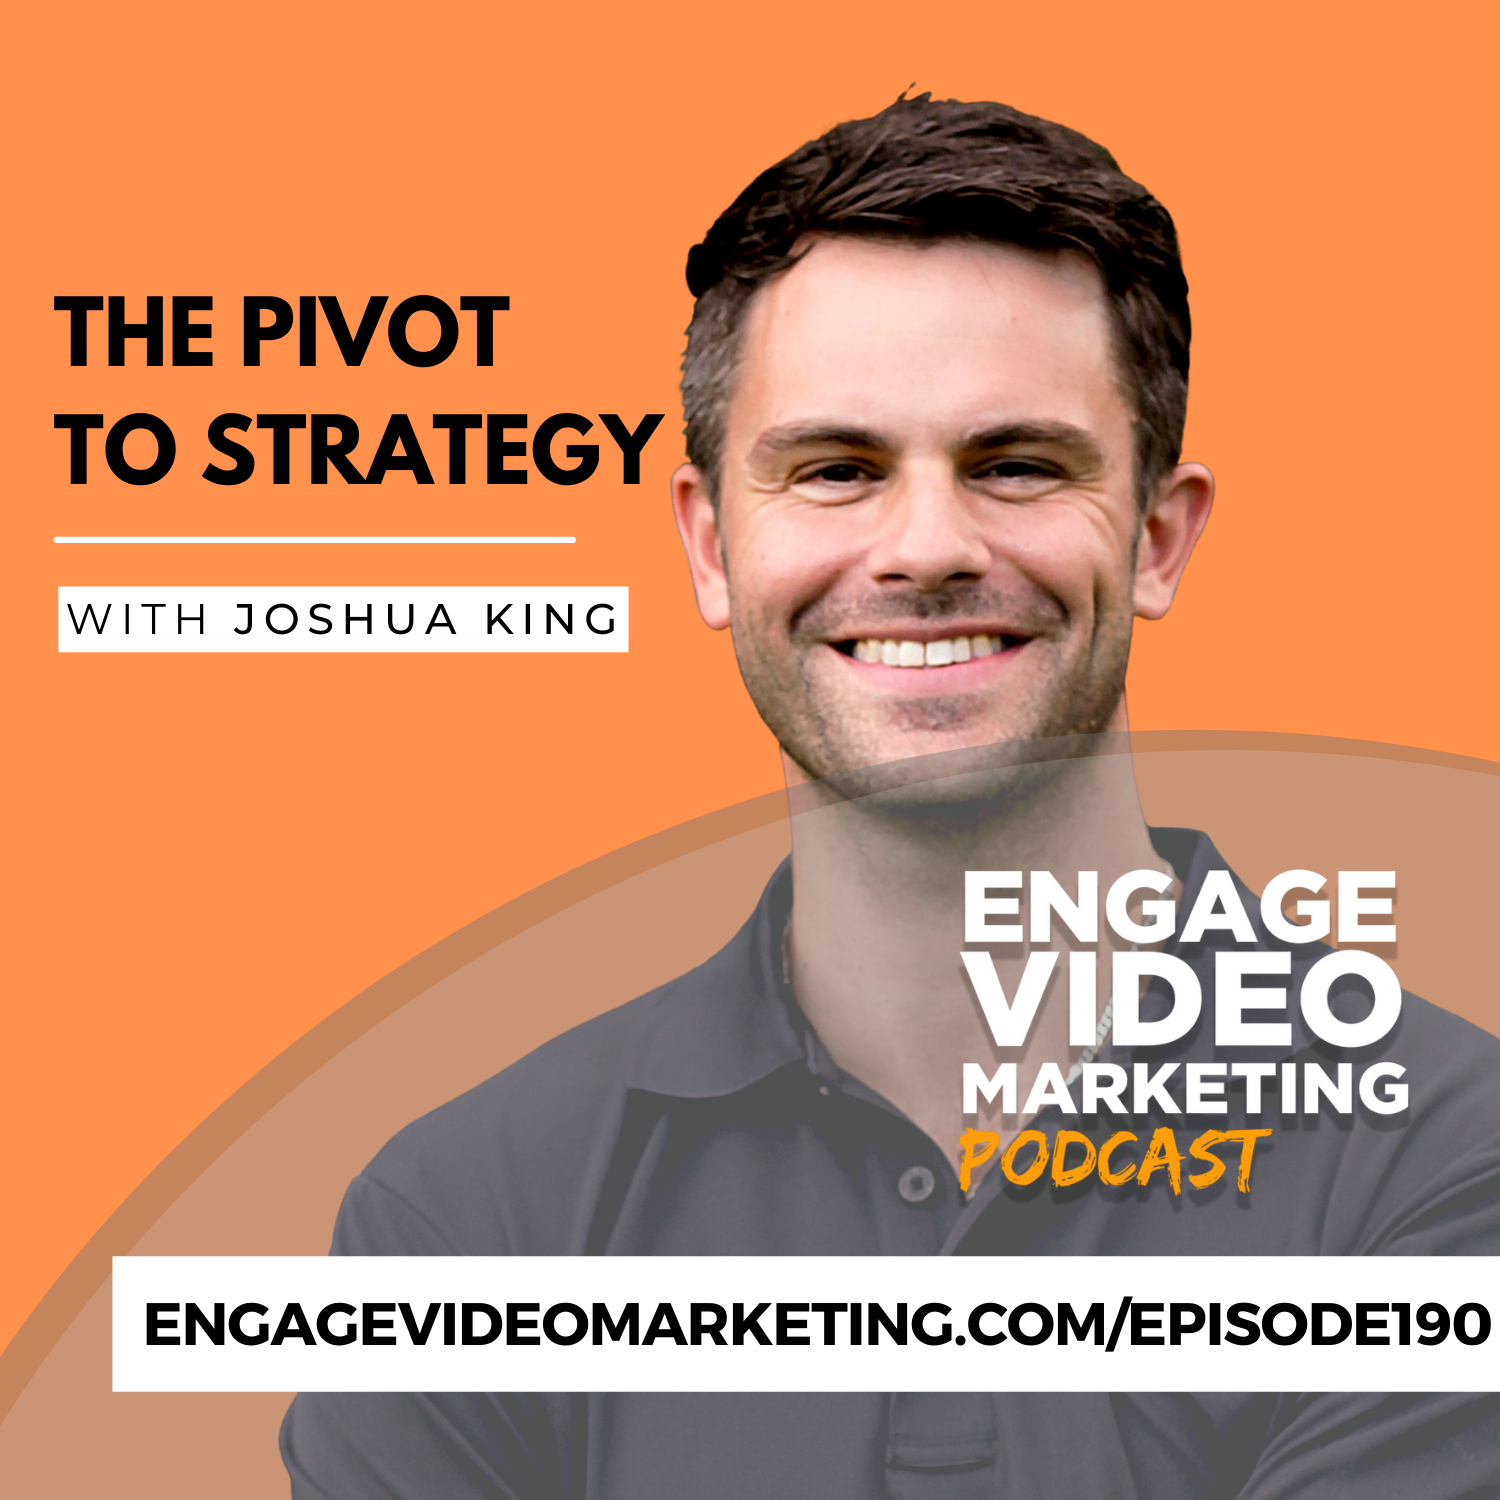 The Pivot to Strategy with Joshua King